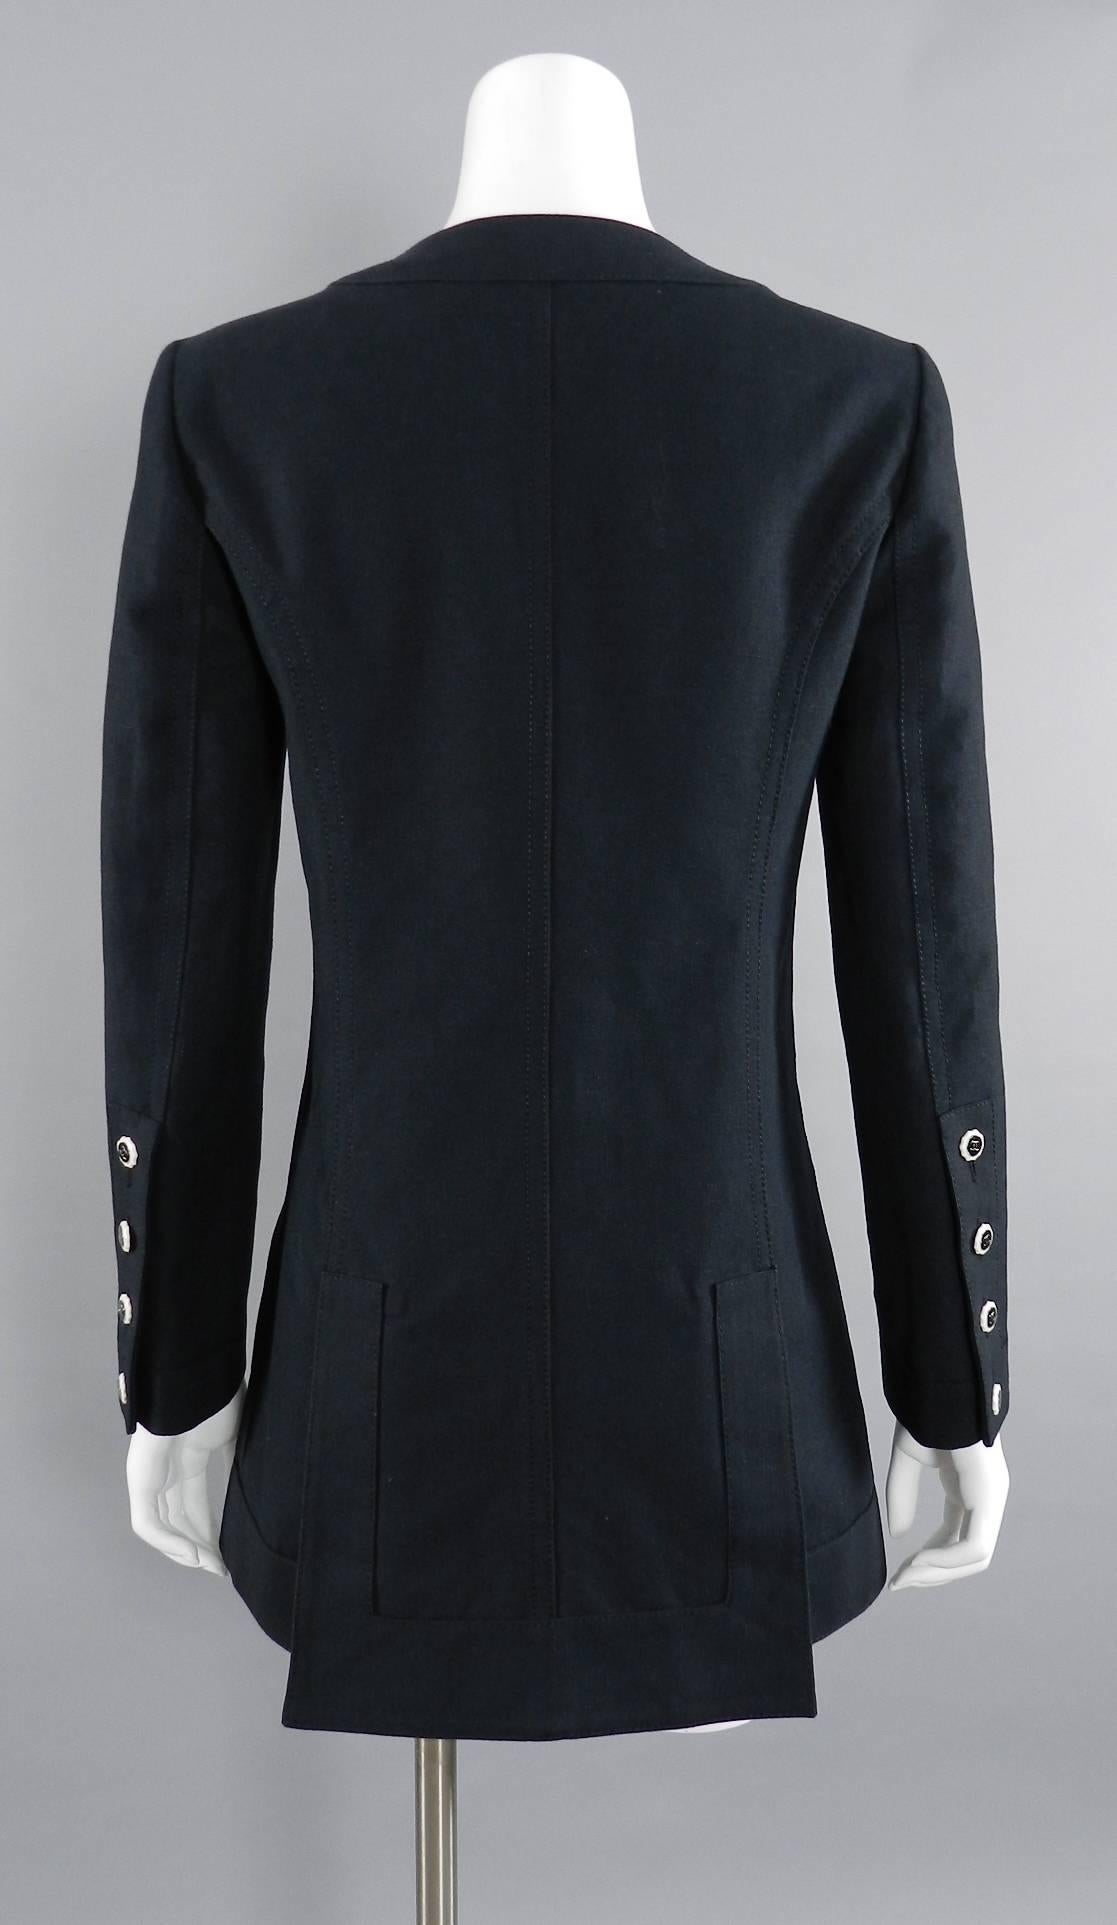 Women's CHANEL 14C Runway Black Cotton Linen Jacket with White Buttons